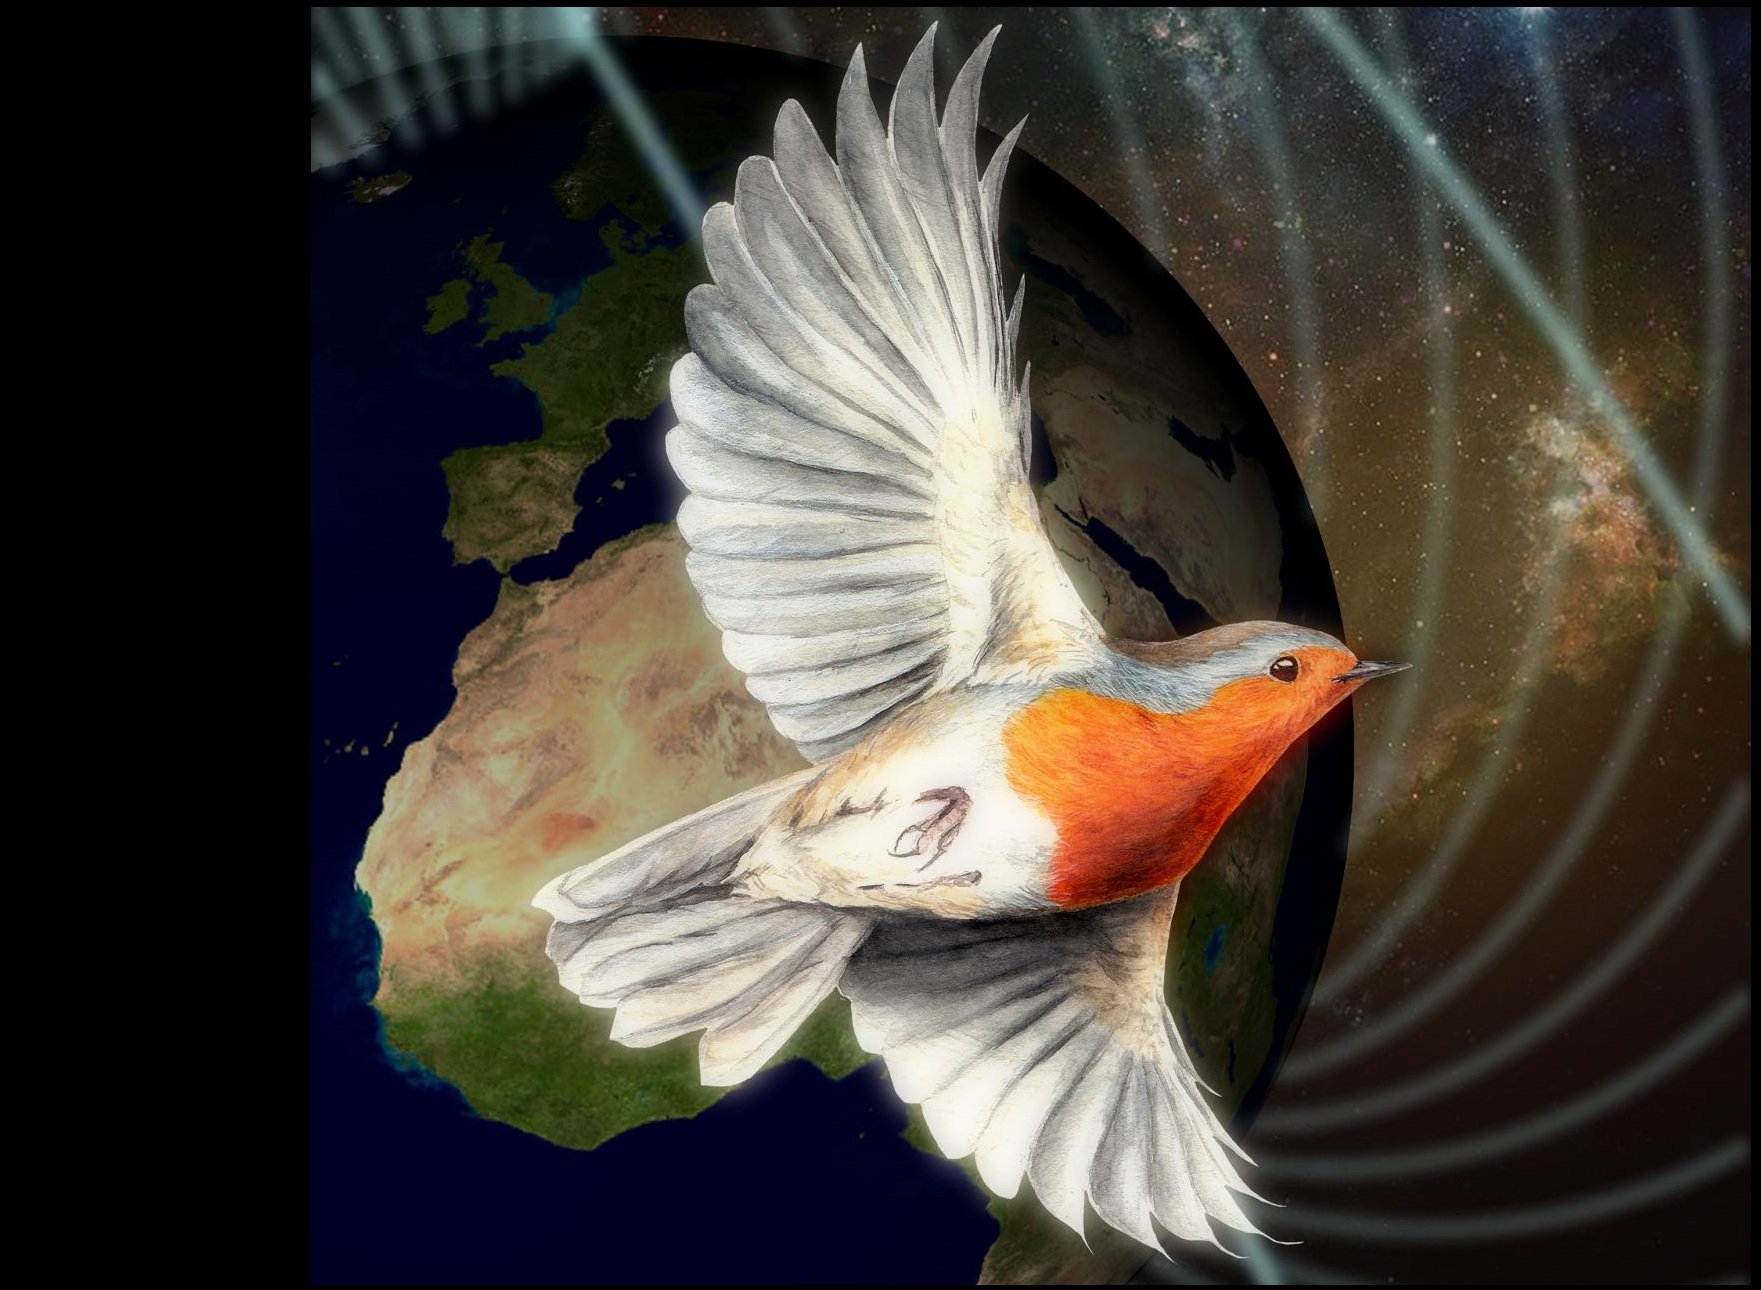 Biophysics on the 'compass' trail of migratory birds